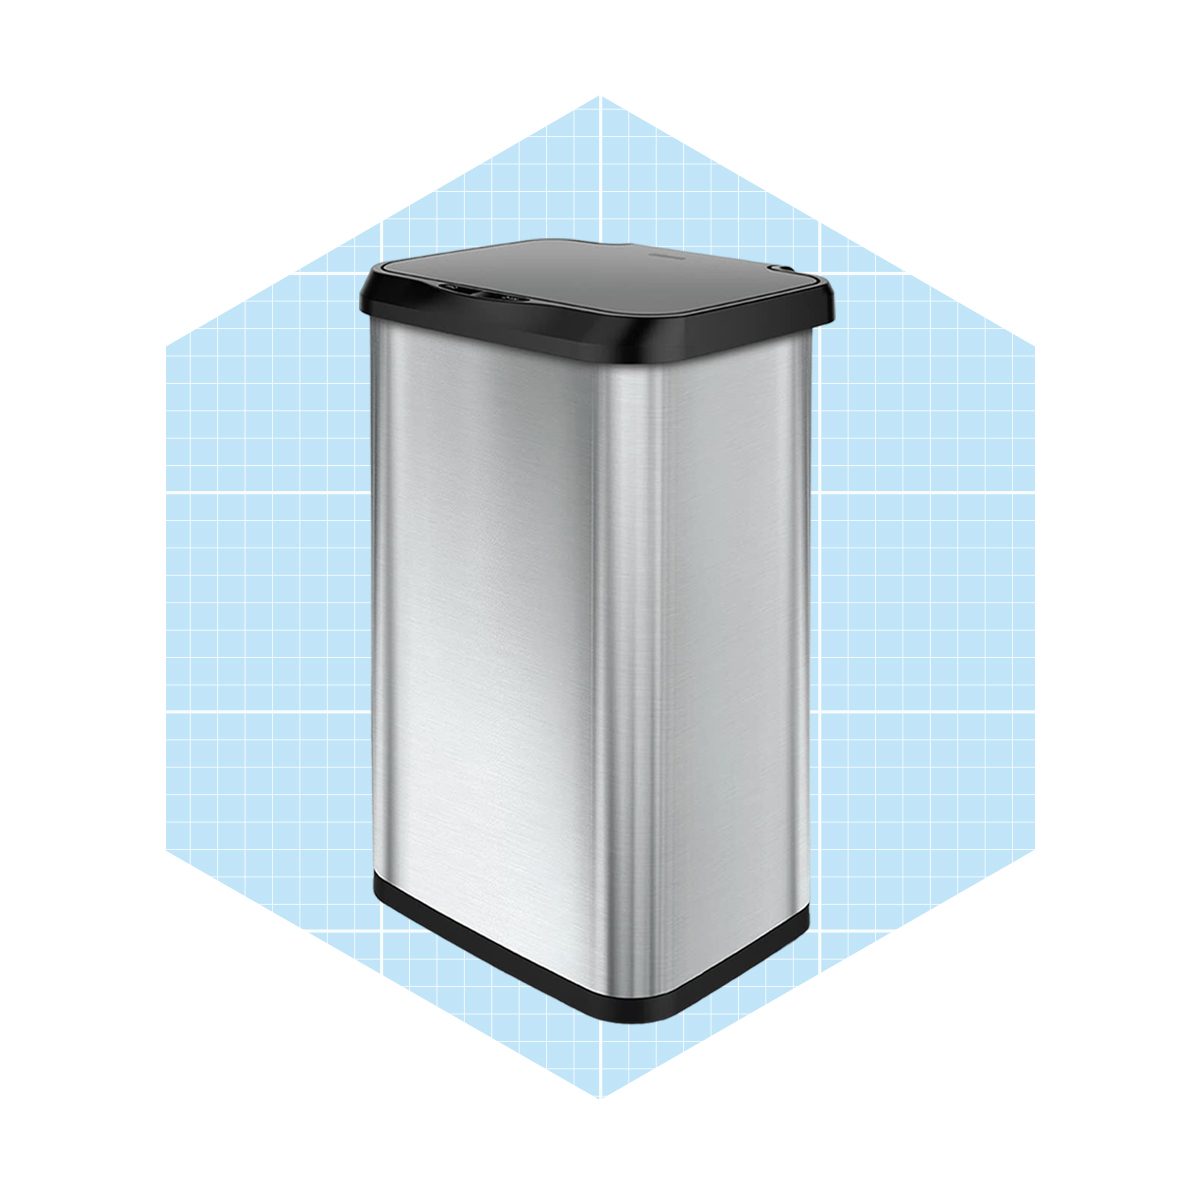 5 Best Motion Sensor Trash Cans and Touchless Trash Cans